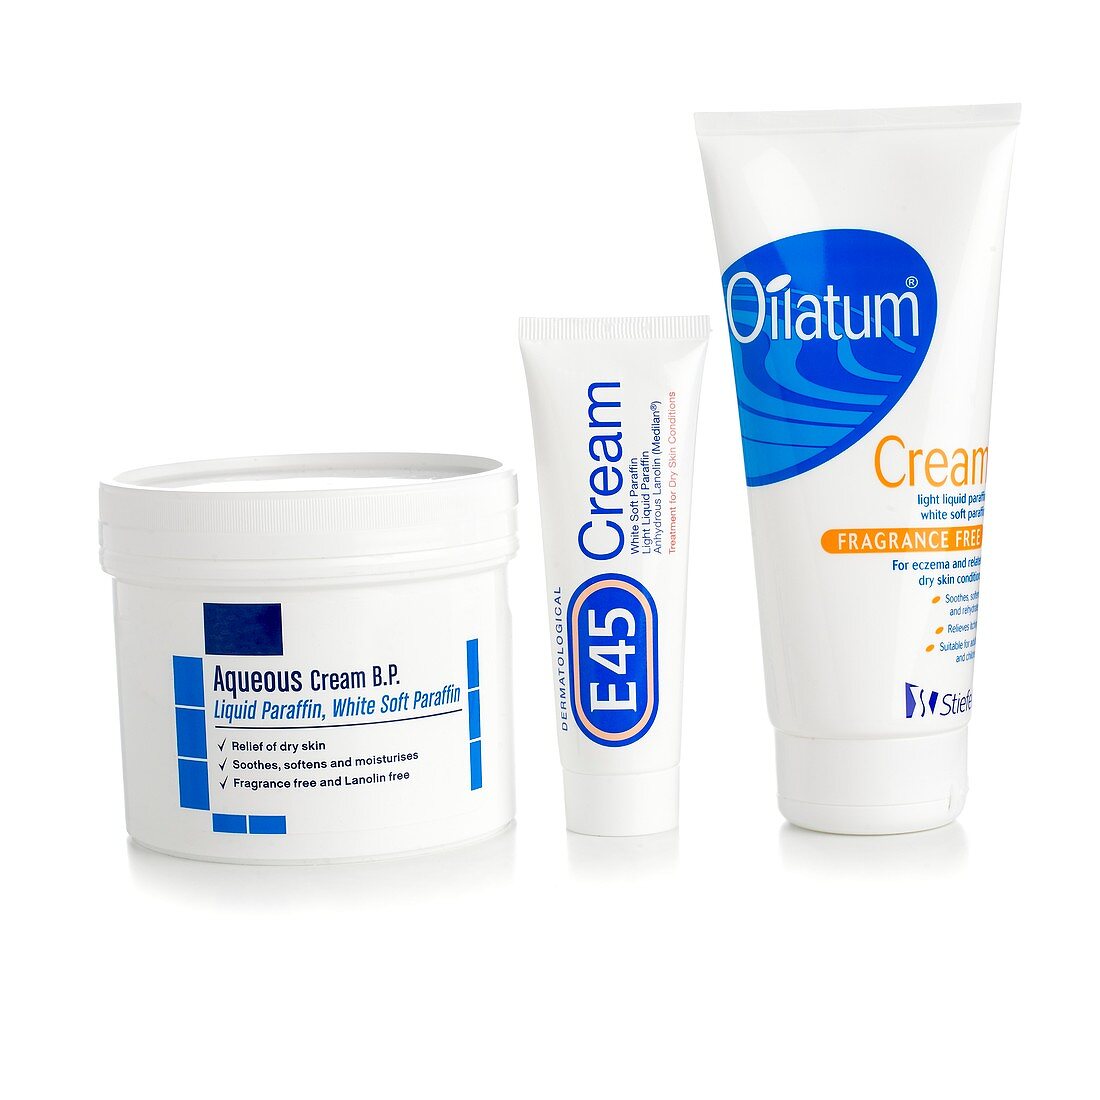 Paraffin-based skin products